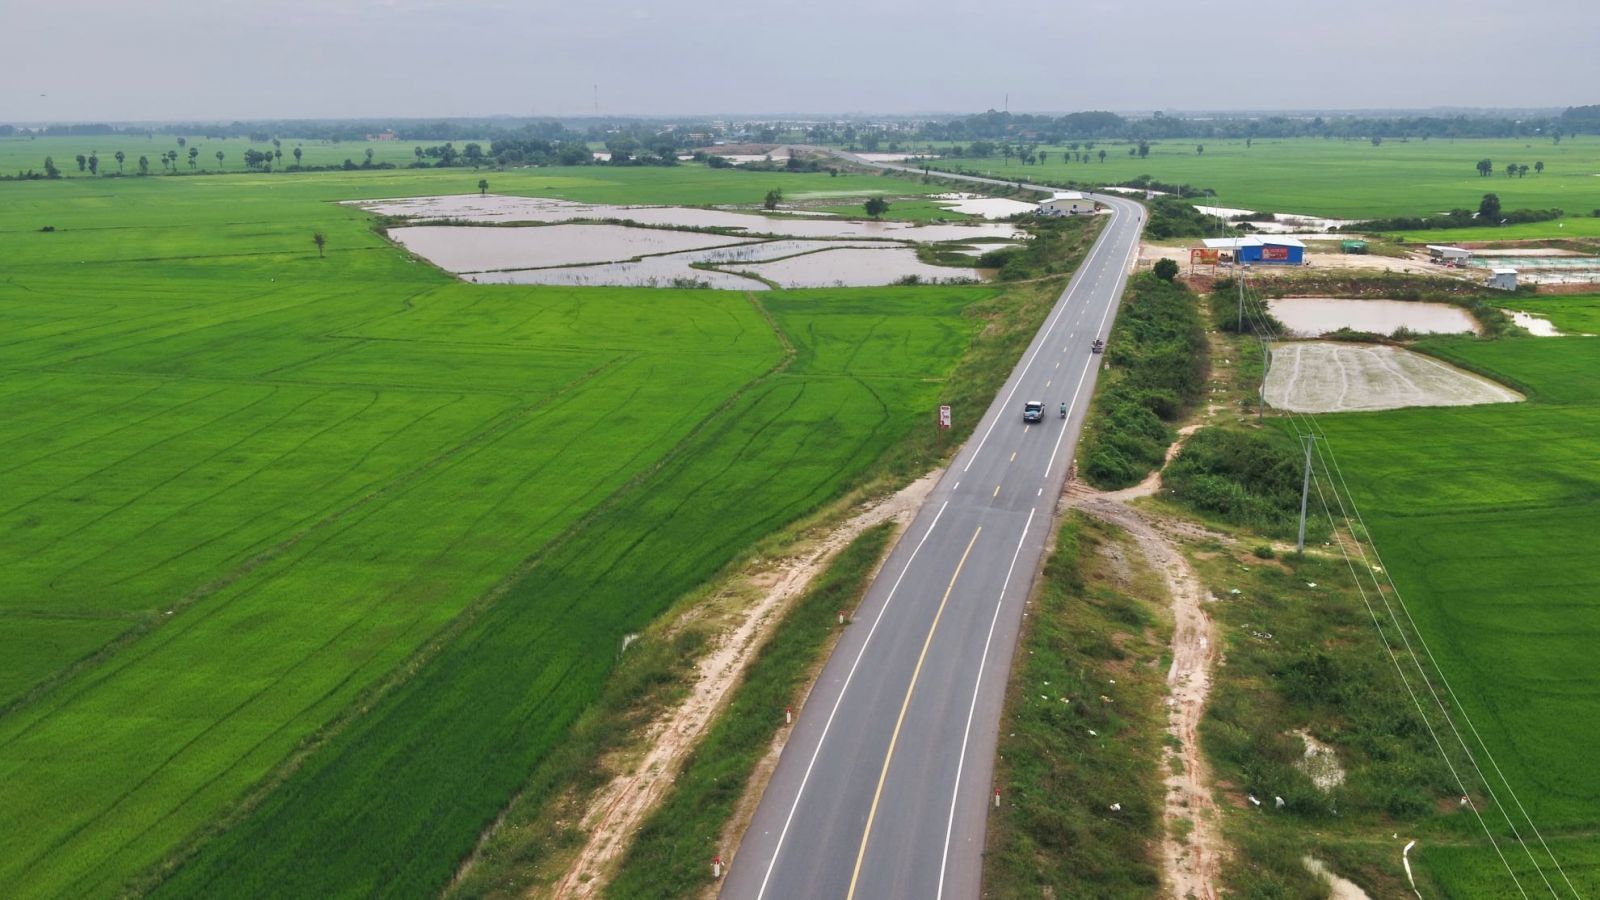 National Road 11 development drives land prices up in Prey Veng